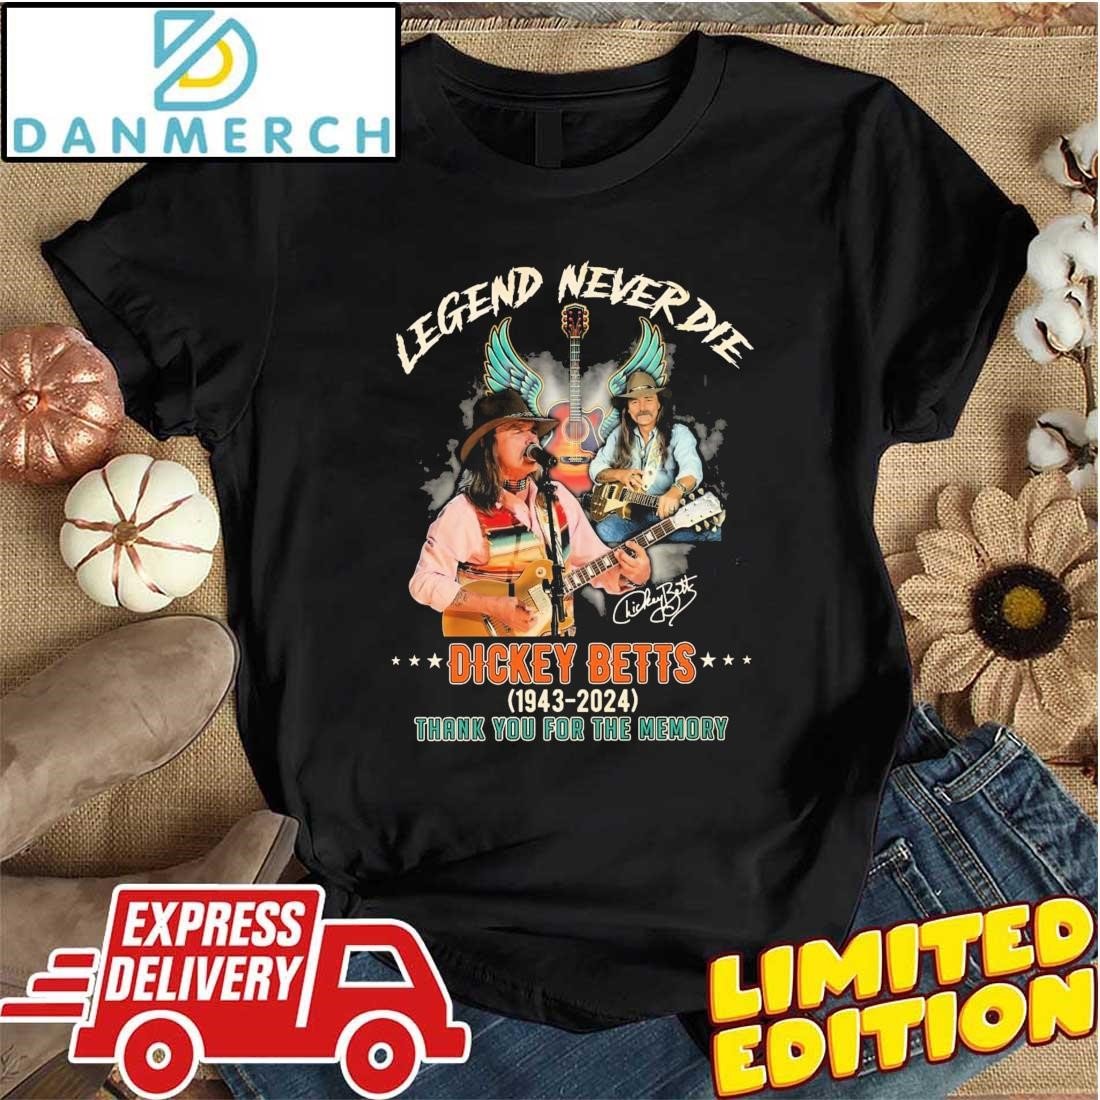 danmerch.com/product/dickey…
Dickey Betts Legend Never Die 1943-2024 Thank You For The Memory Shirt